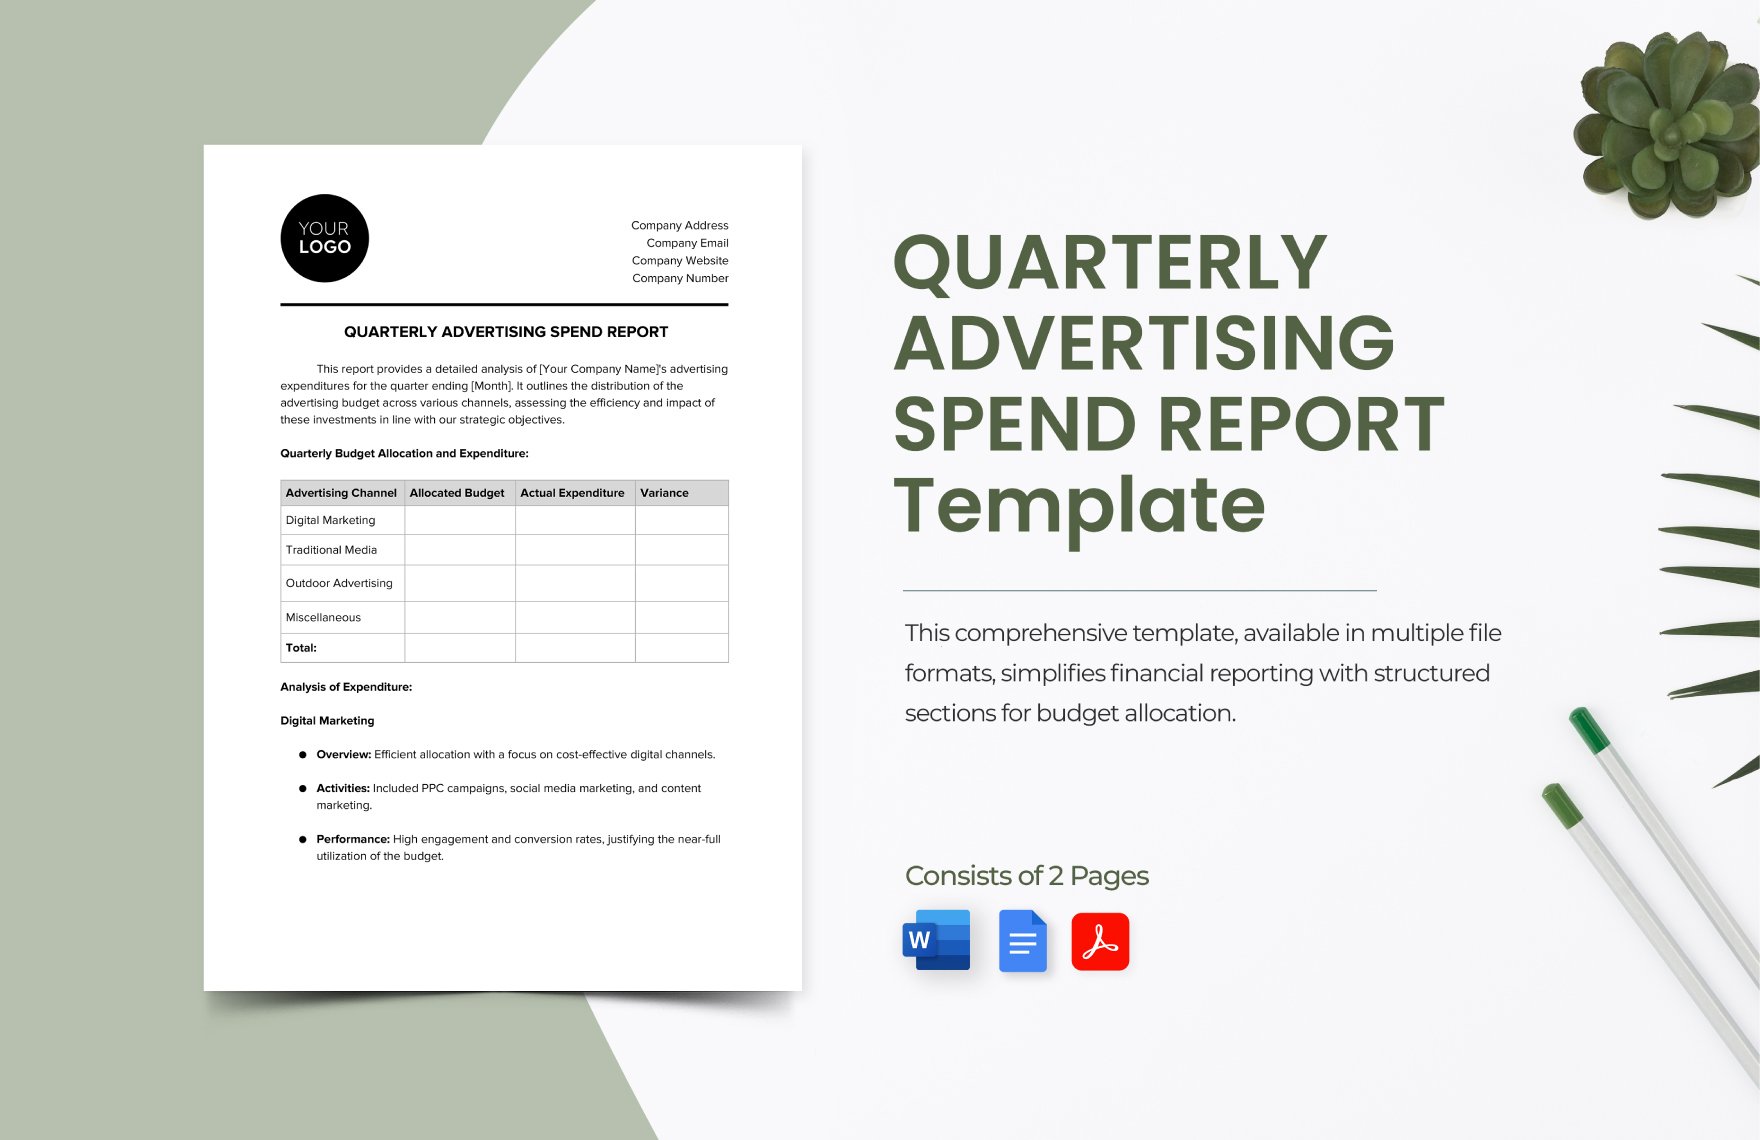 Quarterly Advertising Spend Report Template in Word, Google Docs, PDF